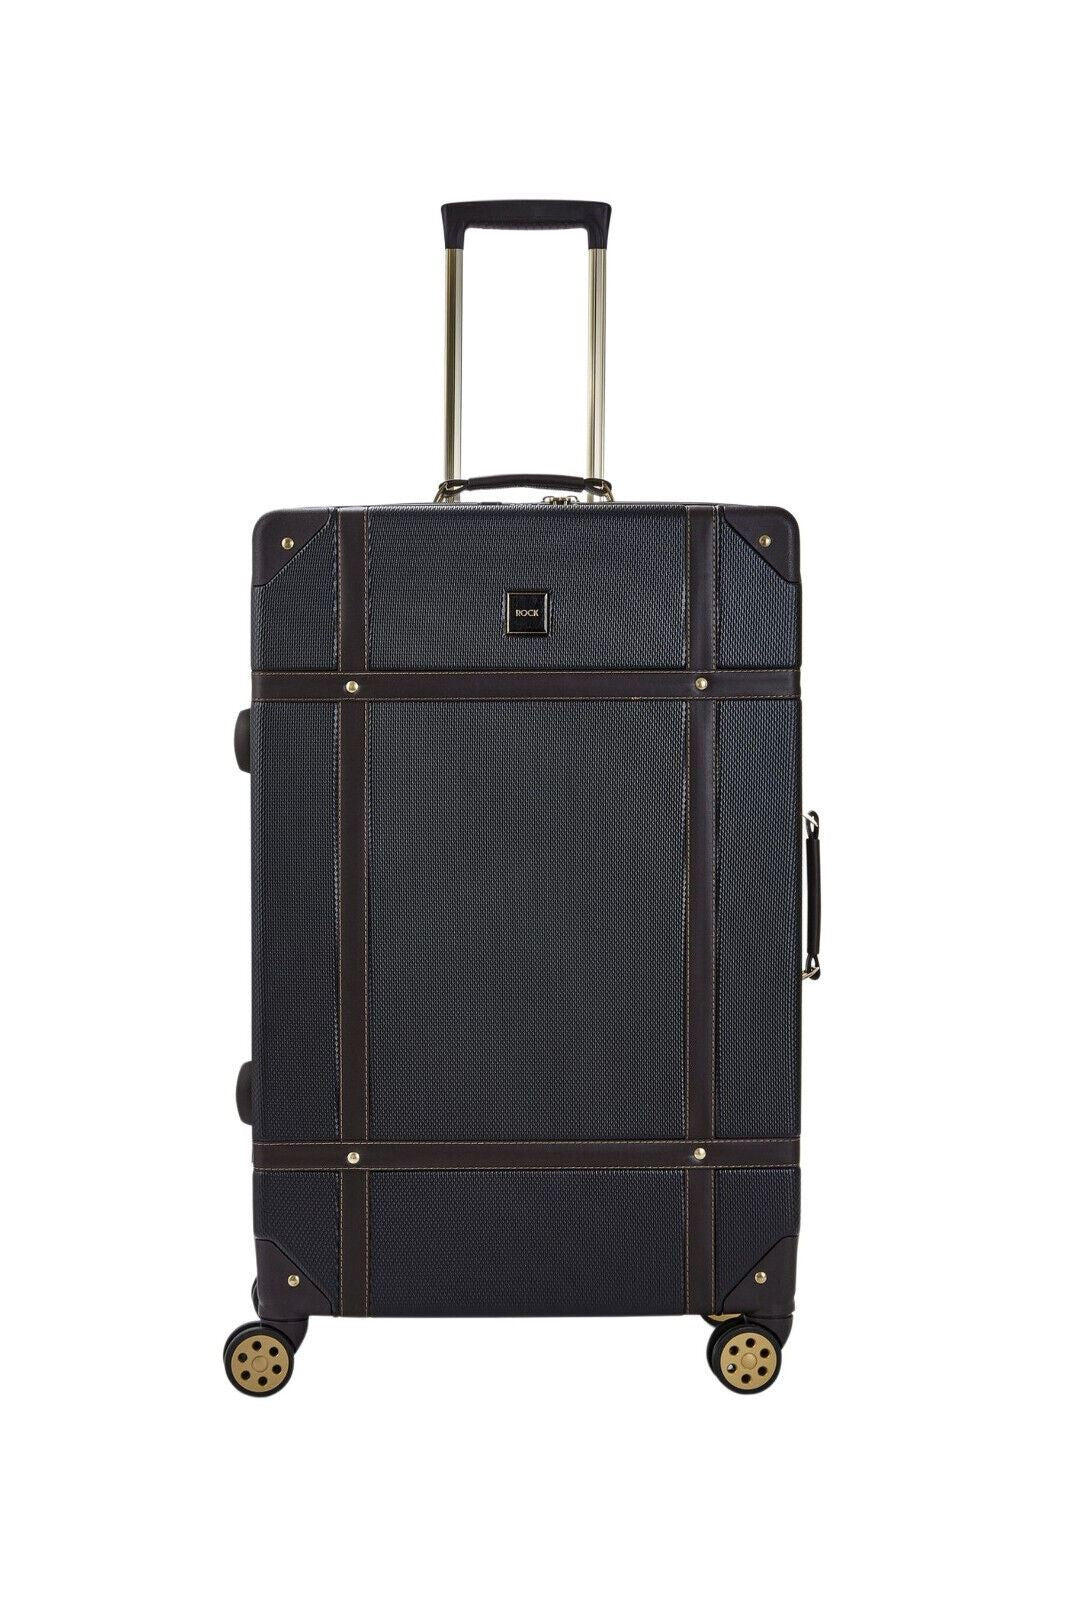 Alexandria Large Hard Shell Suitcase in Black